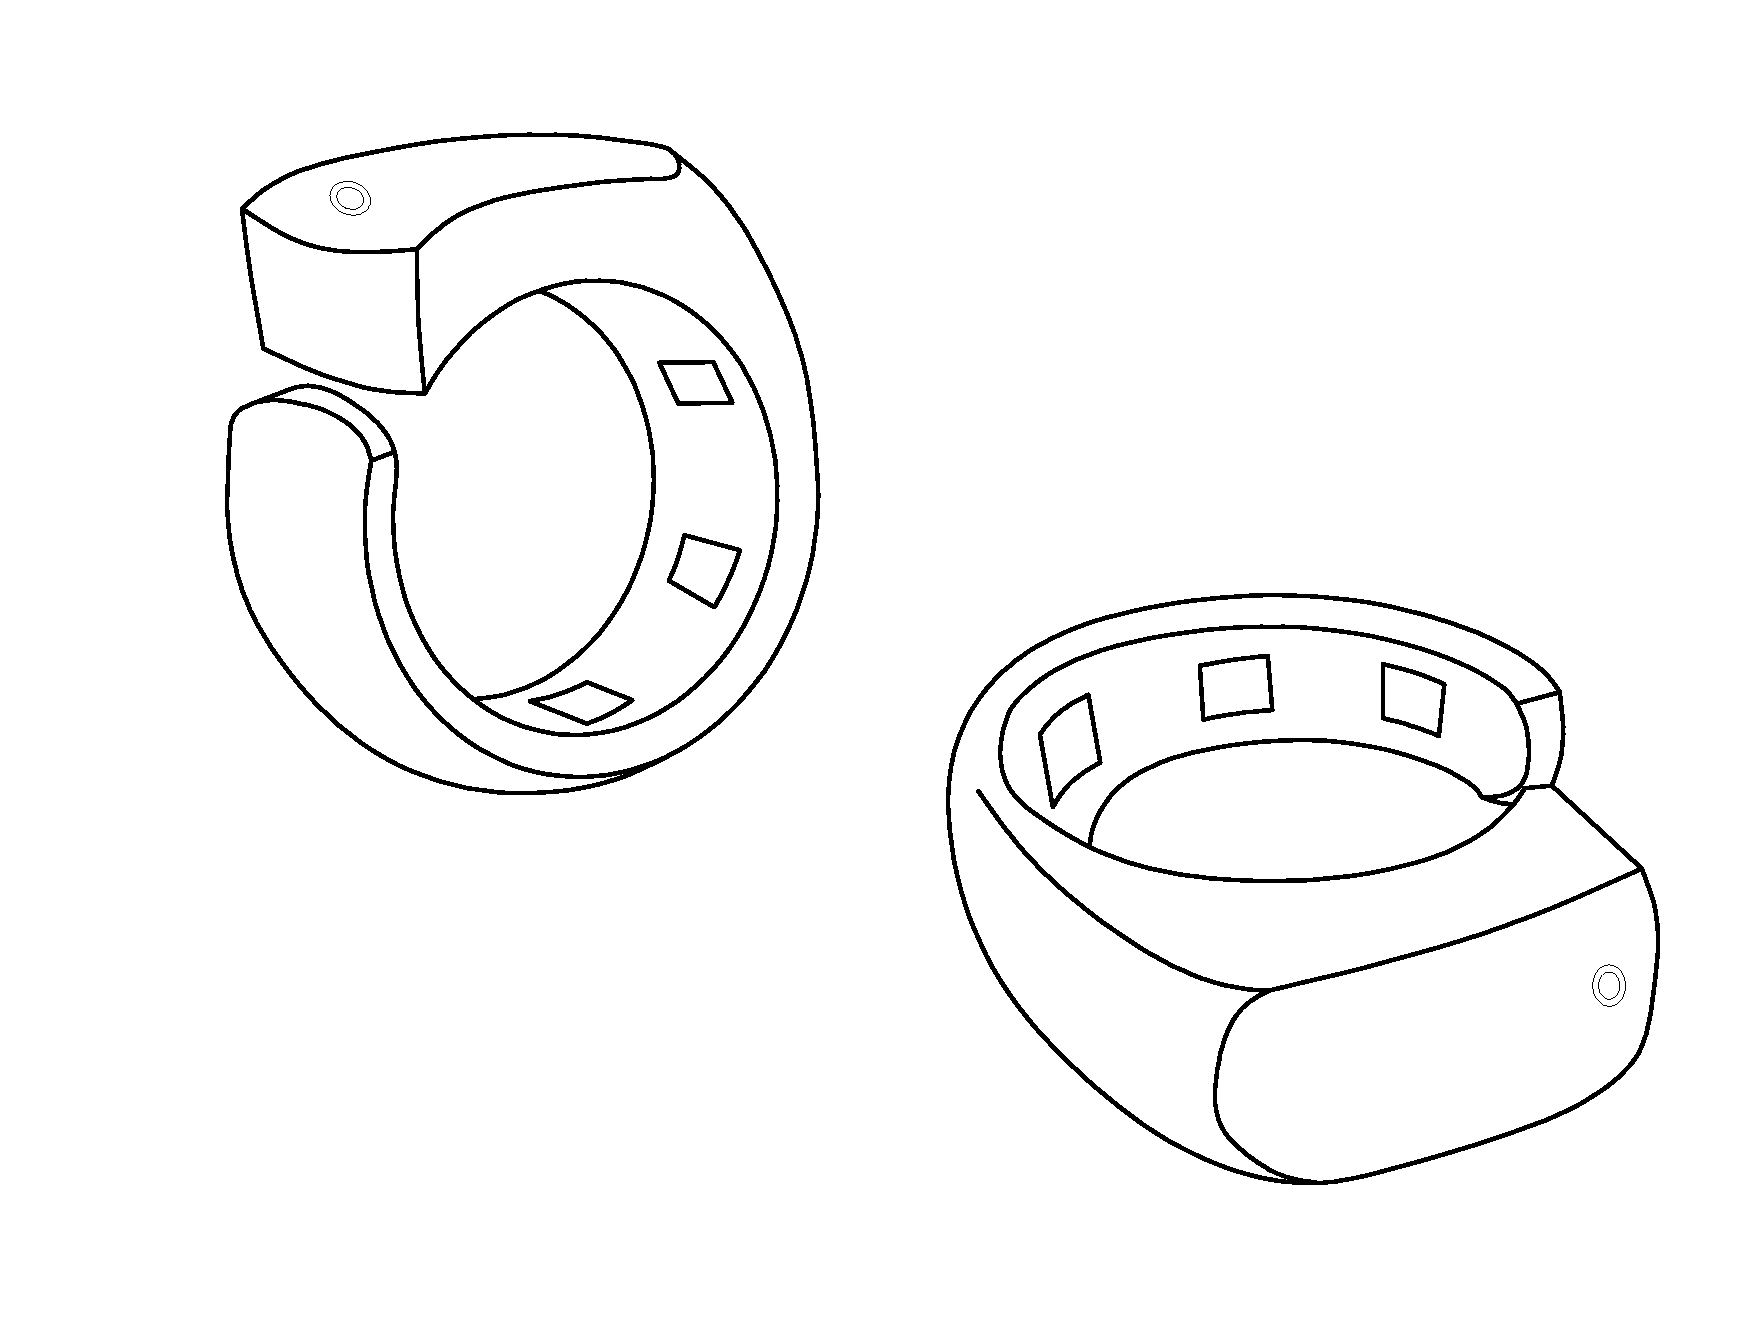 Pulse oximetry ring